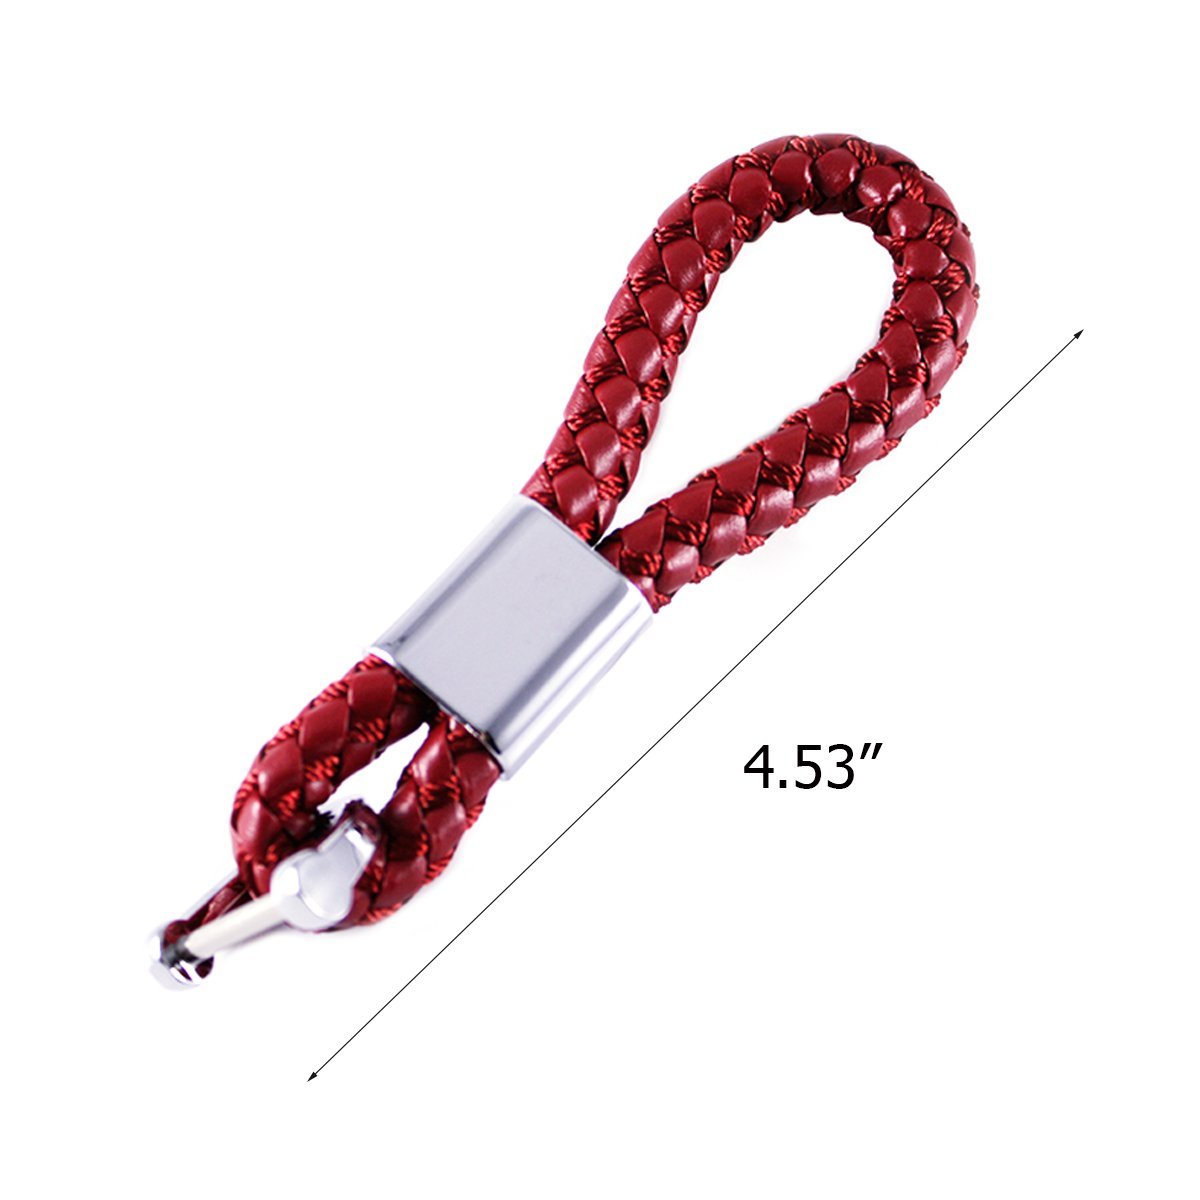 Braided PU Leather Strap Key Chain Ring Universal Fits Car Office Home